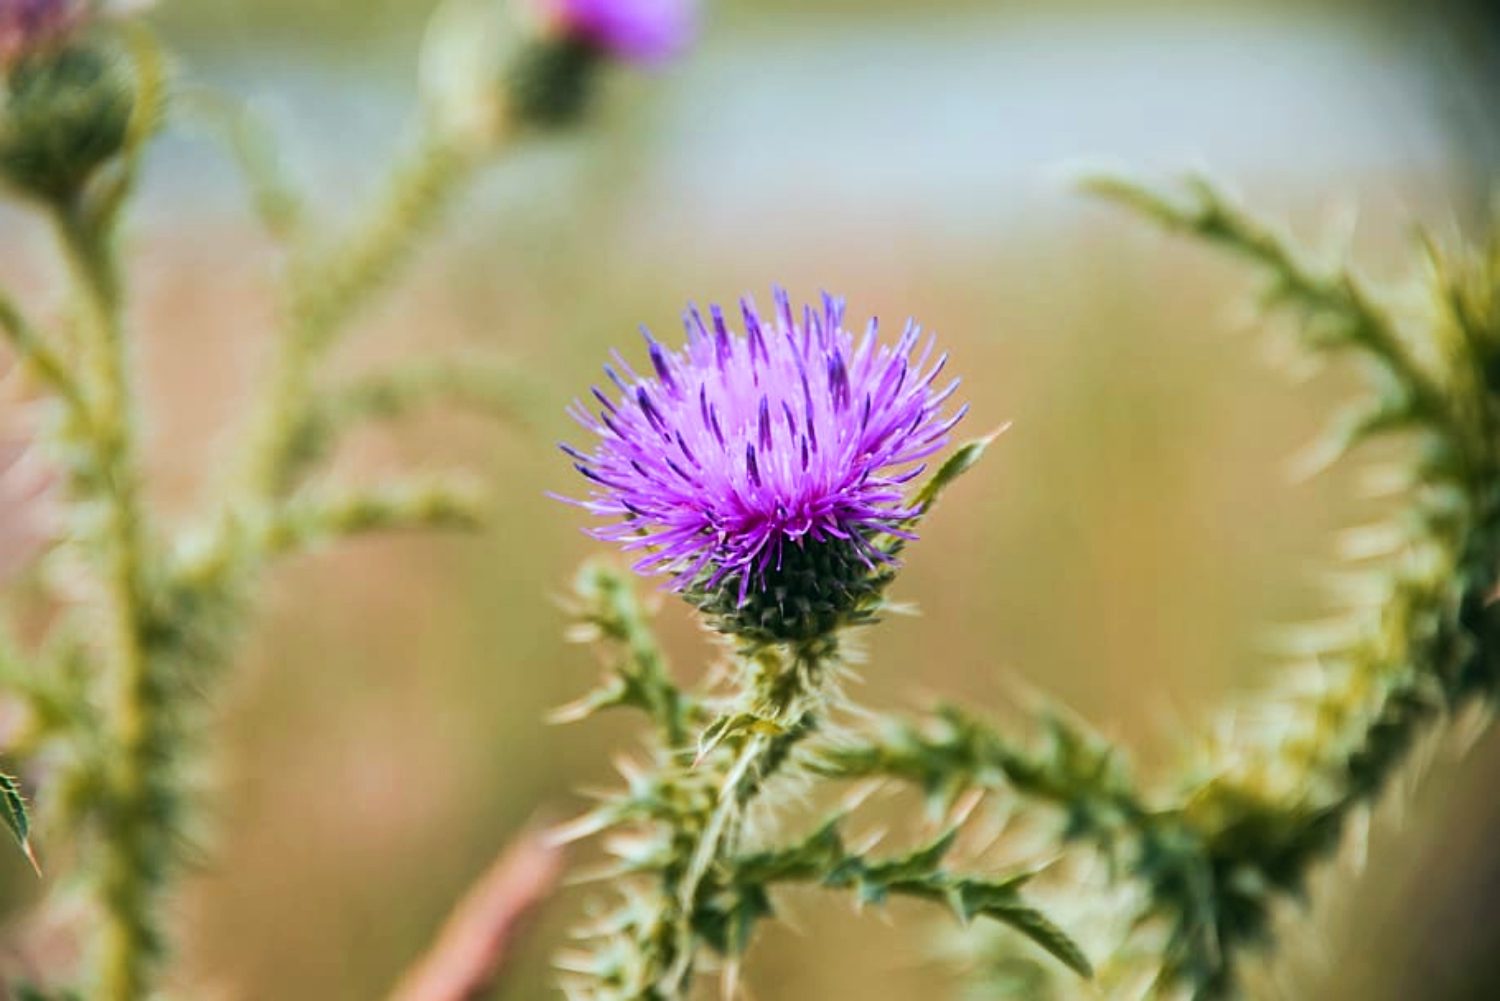 prickly weed with purple flower